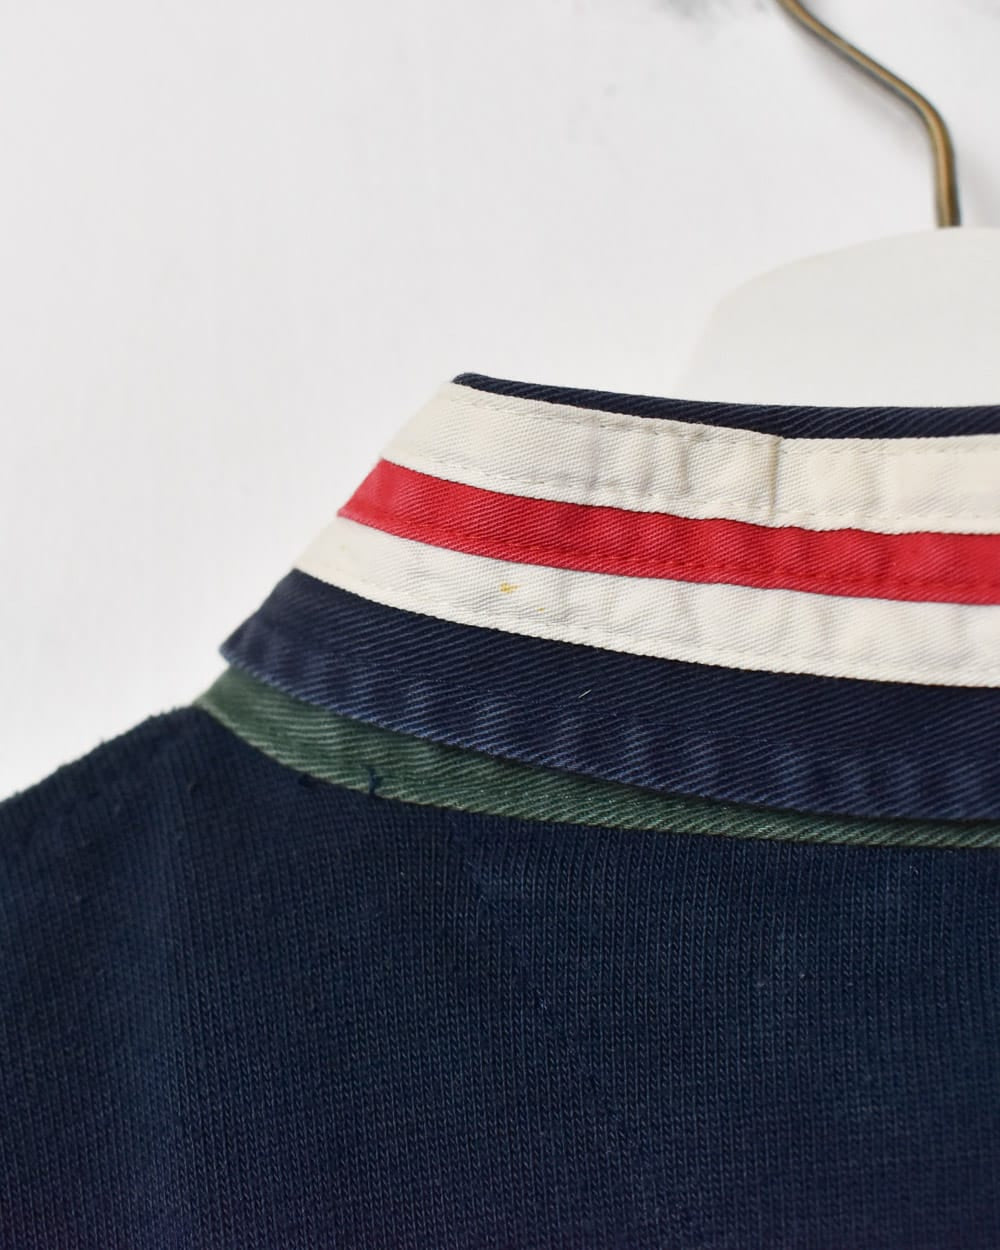 Navy Tommy Hilfiger Rugby Shirt - Small